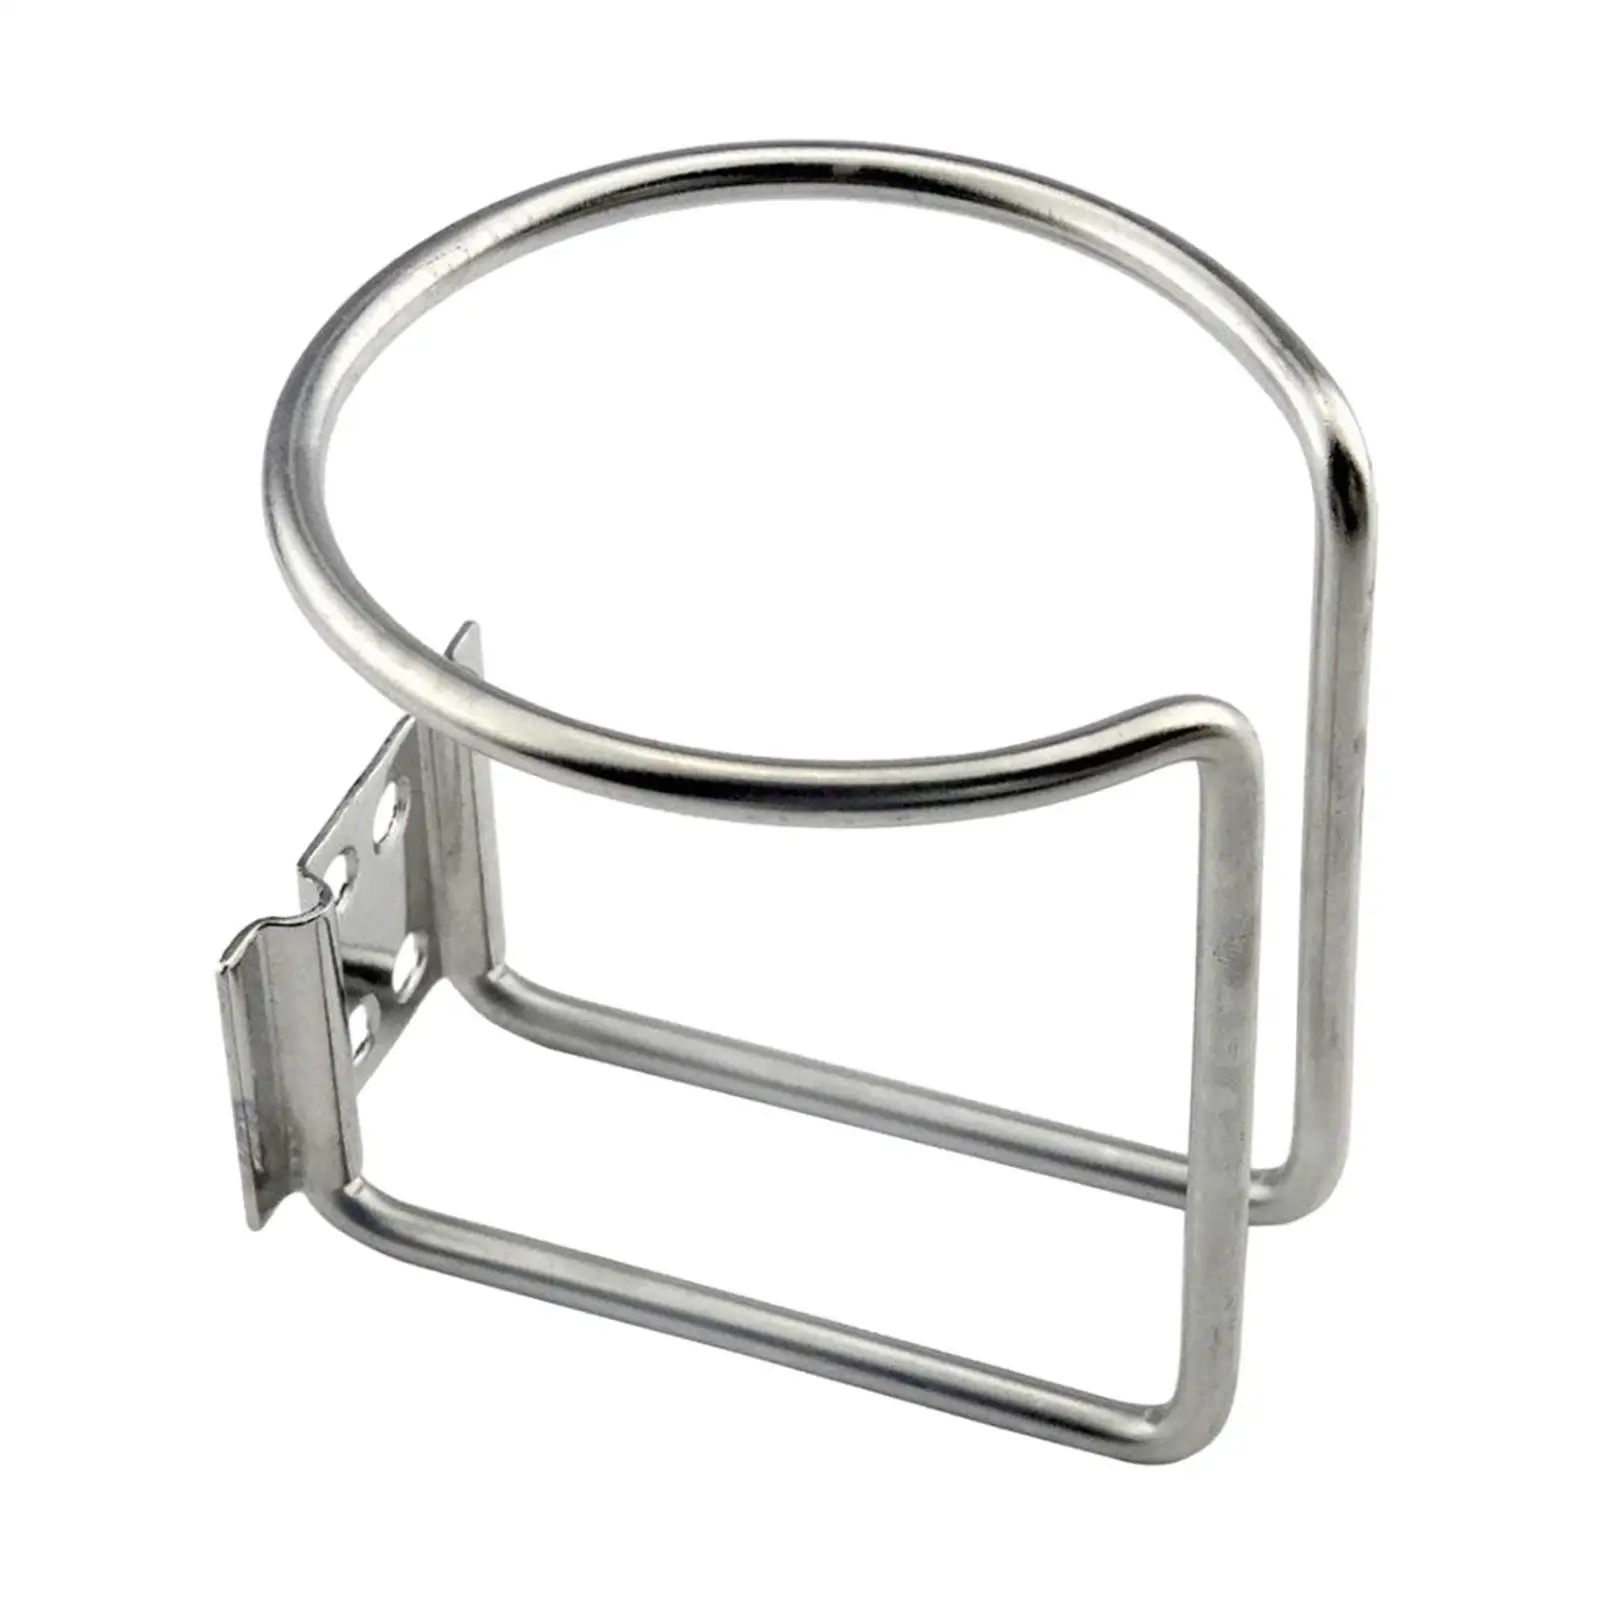 Drinks Holders Stainless Steel Boat Cup Holder for Truck Marine Boat